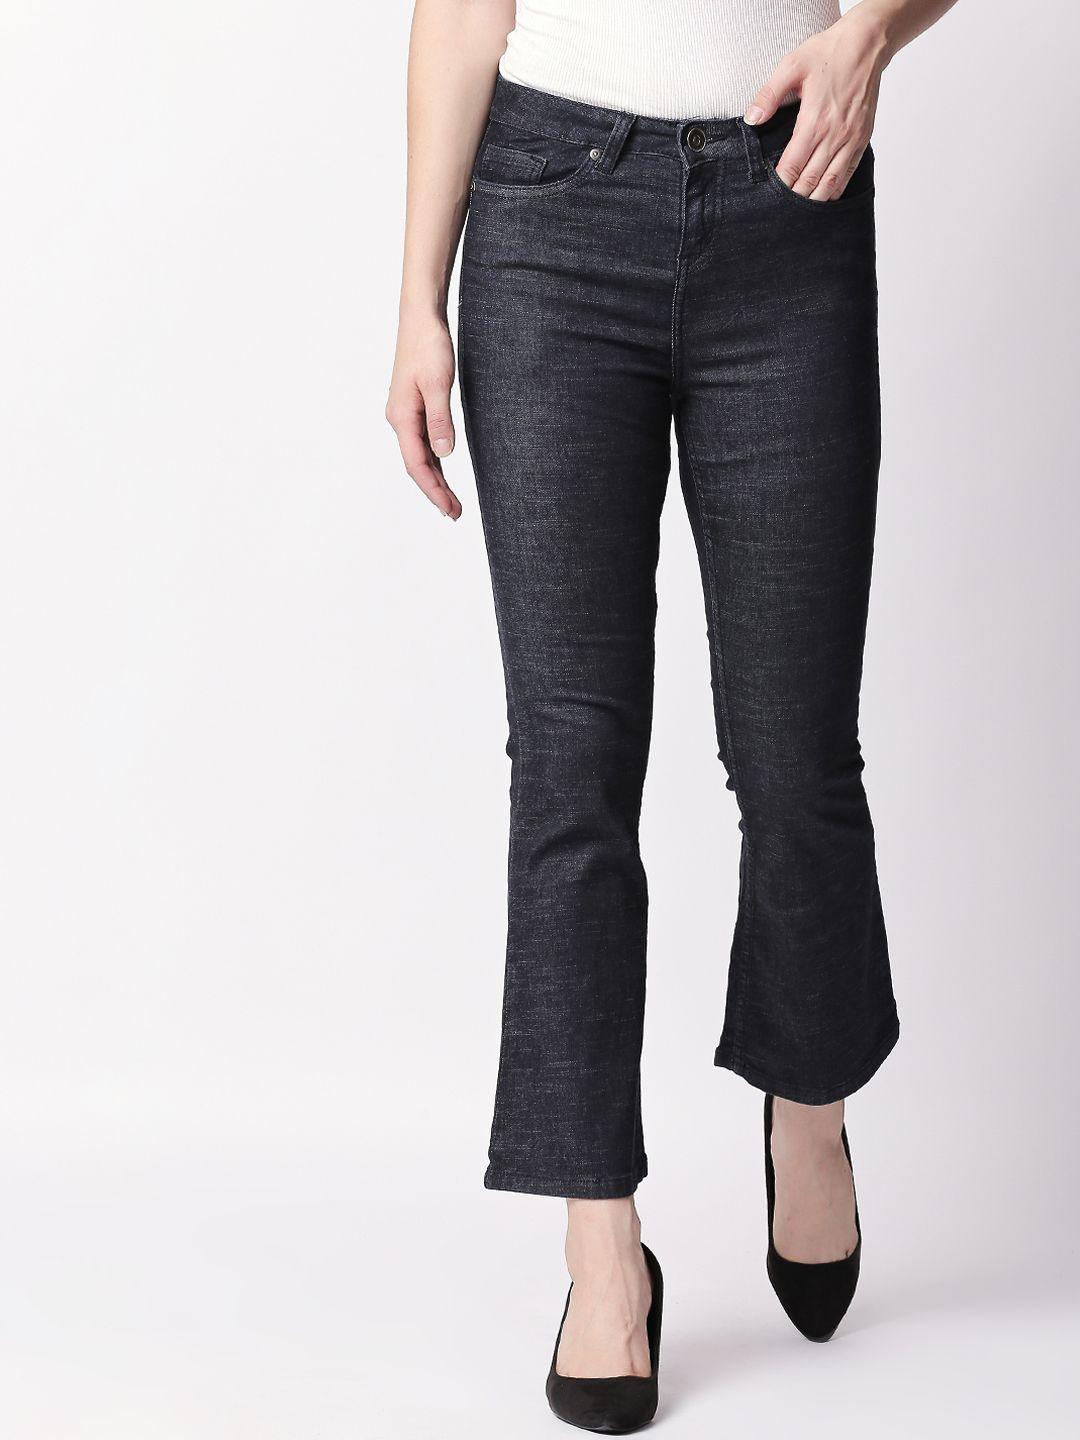 high-star-women-charcoal-grey-bootcut-mid-rise-clean-look-stretchable-jeans